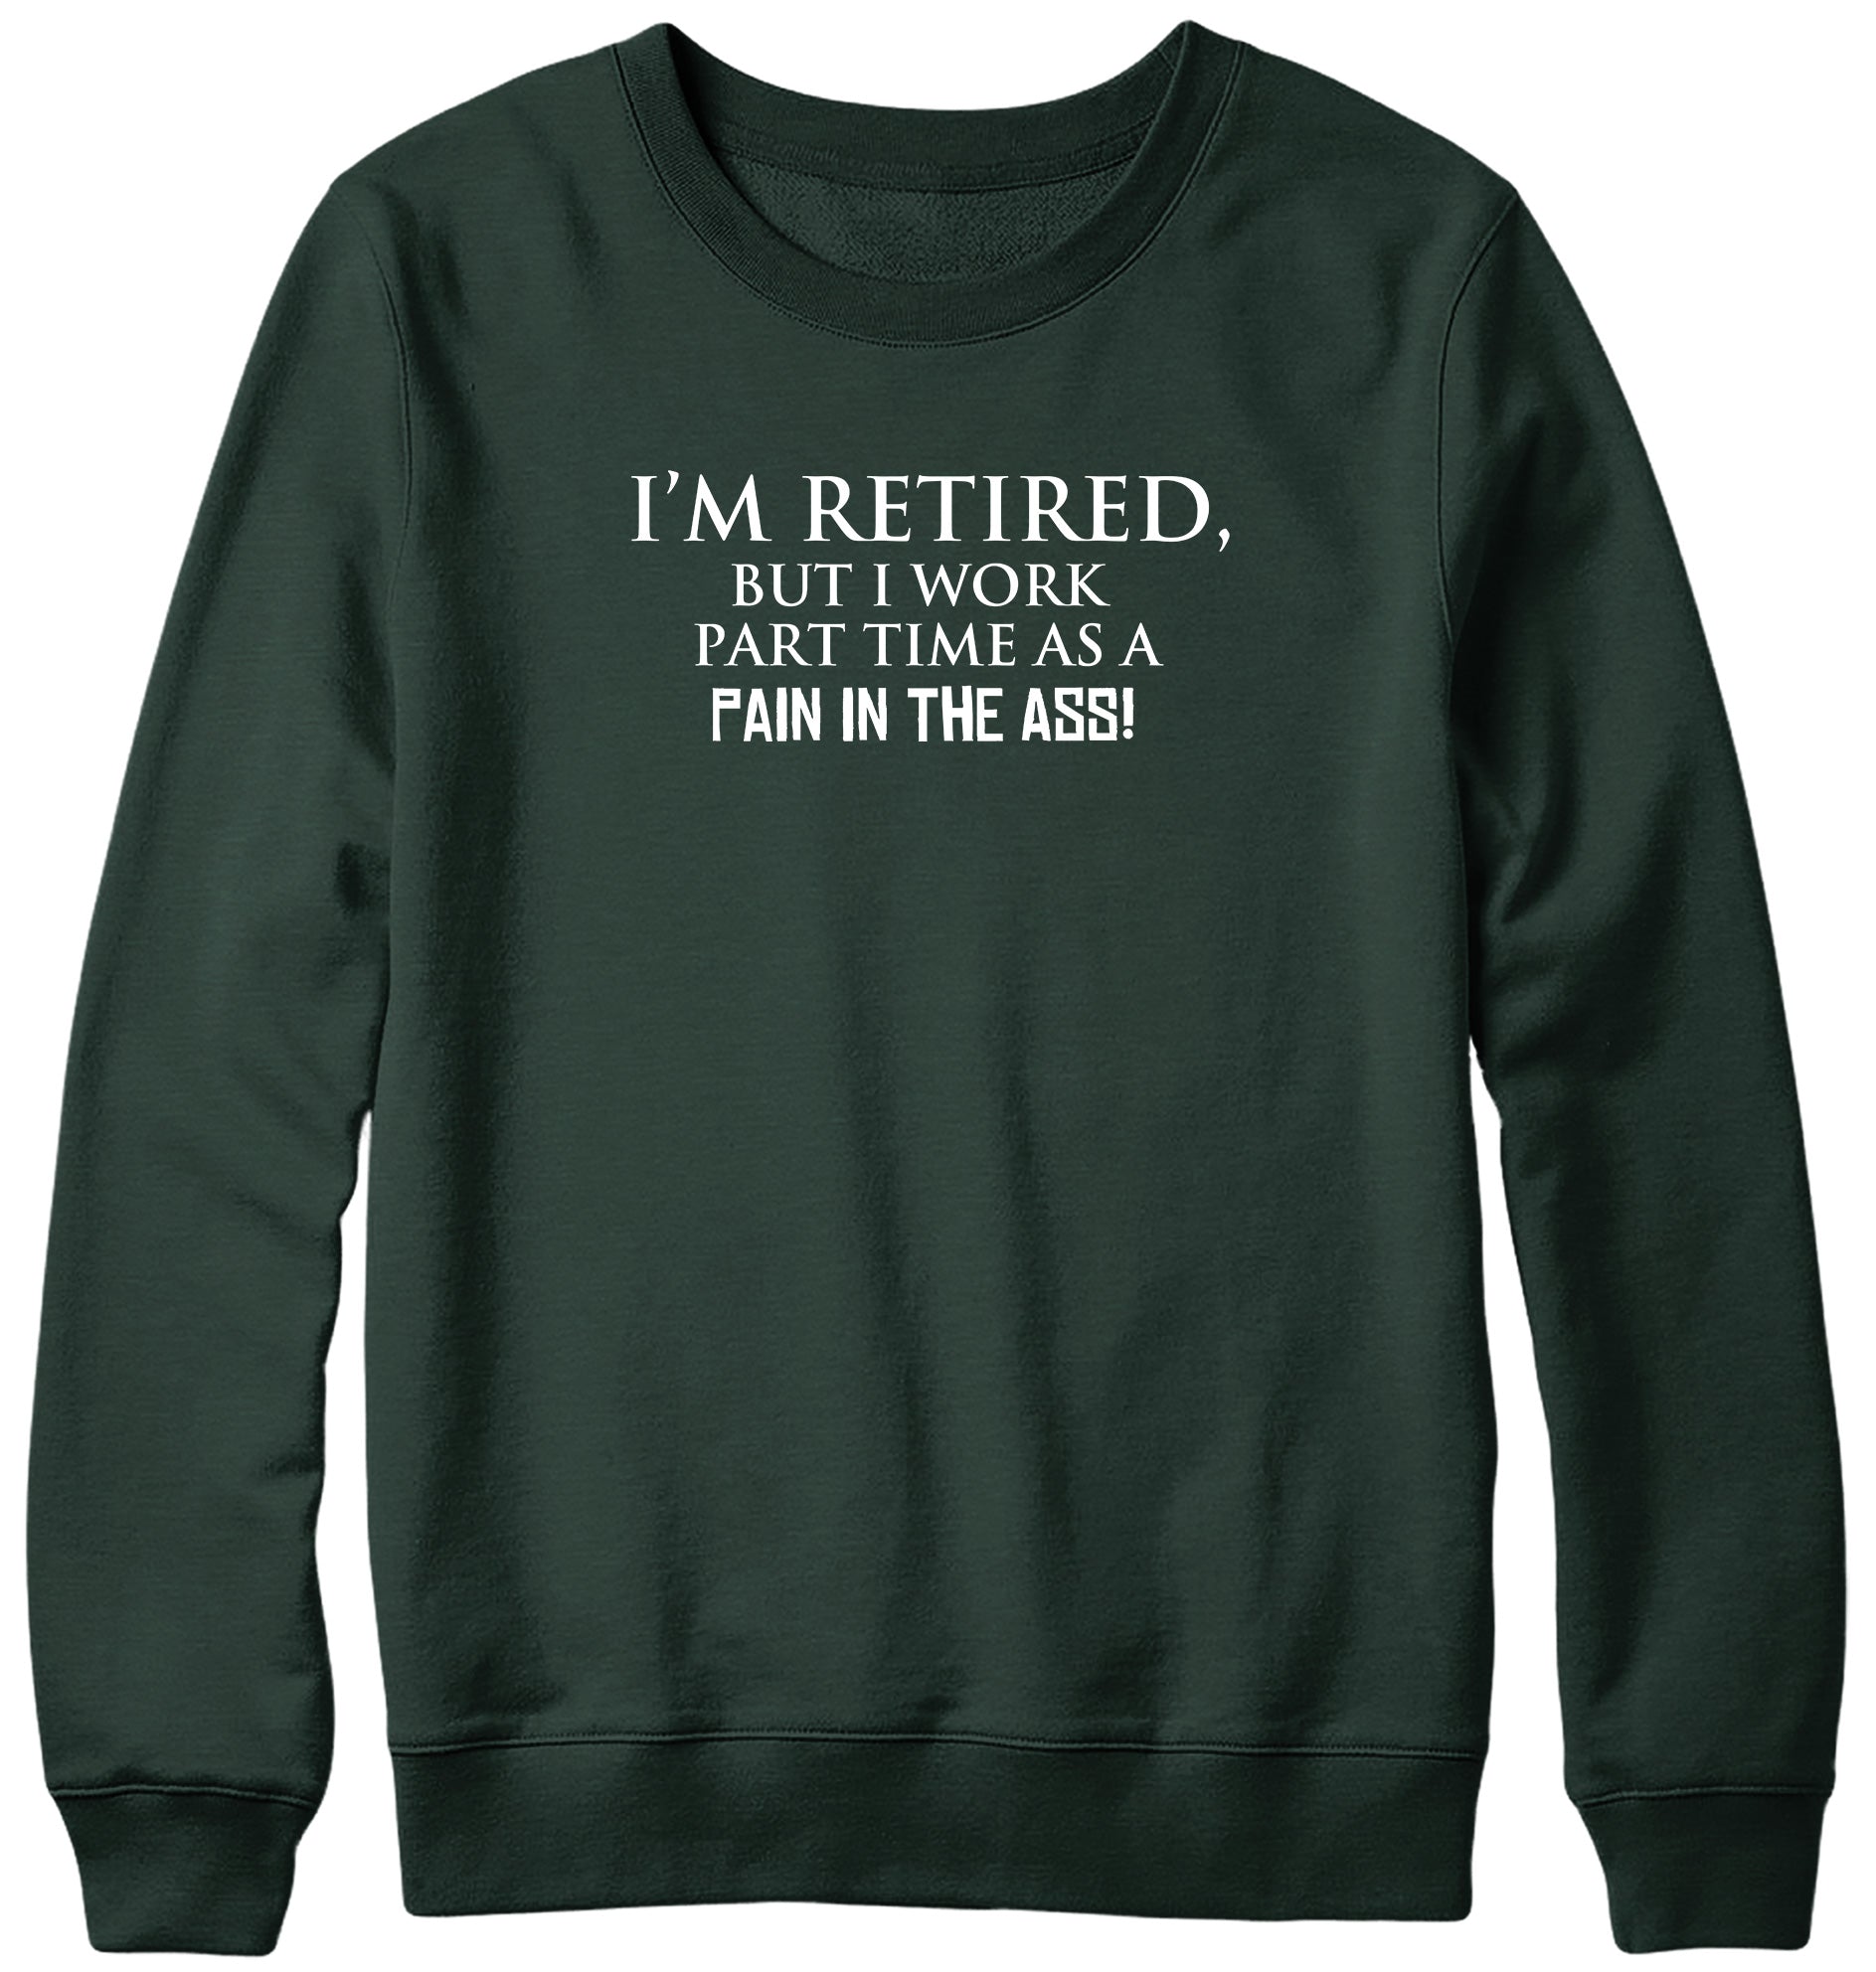 I'M RETIRED BUT I WORK PART TIME AS A PAIN IN THE ASS! WOMENS LADIES MENS UNISEX SWEATSHIRT